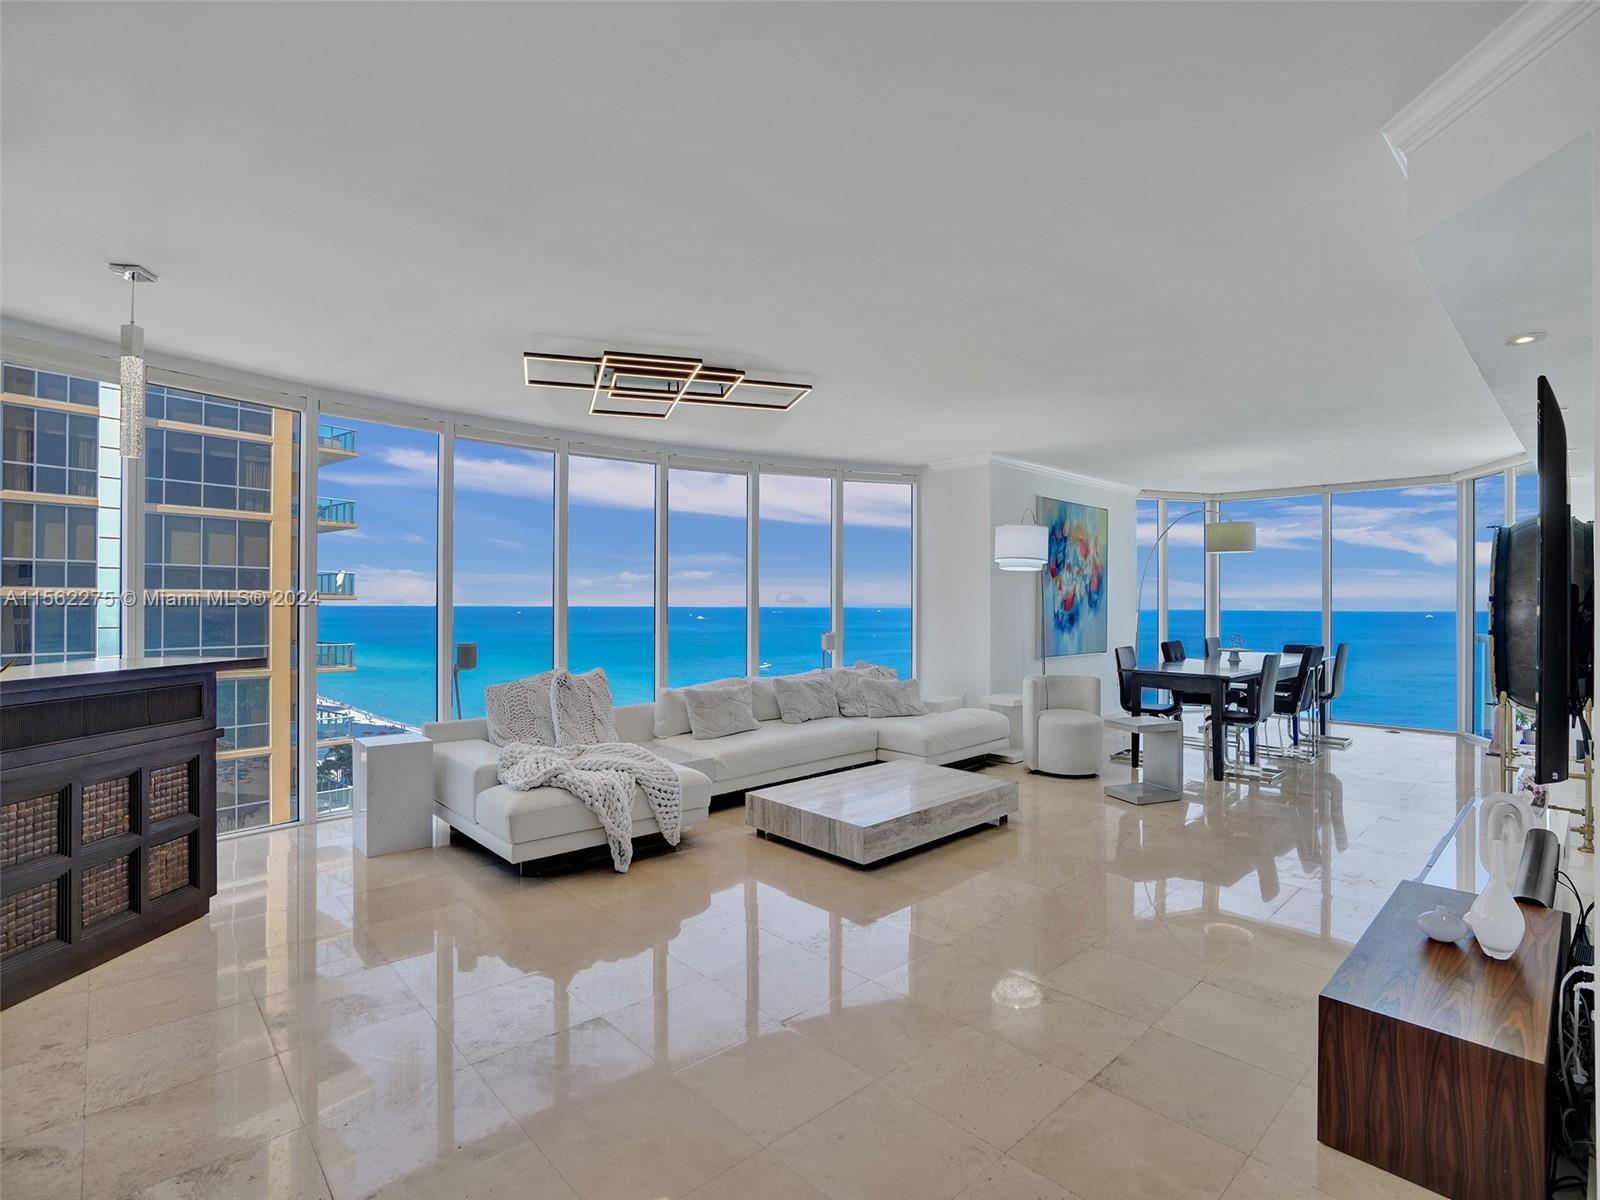 AMAZING SUNRISE TO SUNSET VIEWS FROM THIS UNIQUE SPACIOUS 3BED 3 BATH + DEN RESIDENCE.
GREAT LOCATION, CENTRALY LOCATED IN SUNNY ISLES.
WALK TO RESTAURANTS, MARKET, WALGREENS, BANKS, SCHOOLS ETC.
AMENITIES AND COMMON AREAS HAVE BEEN RECENTLY UPGRADED.
EASY TO SHOW, CONTACT IN HOUSE AGENT FOR SHOWINGS.